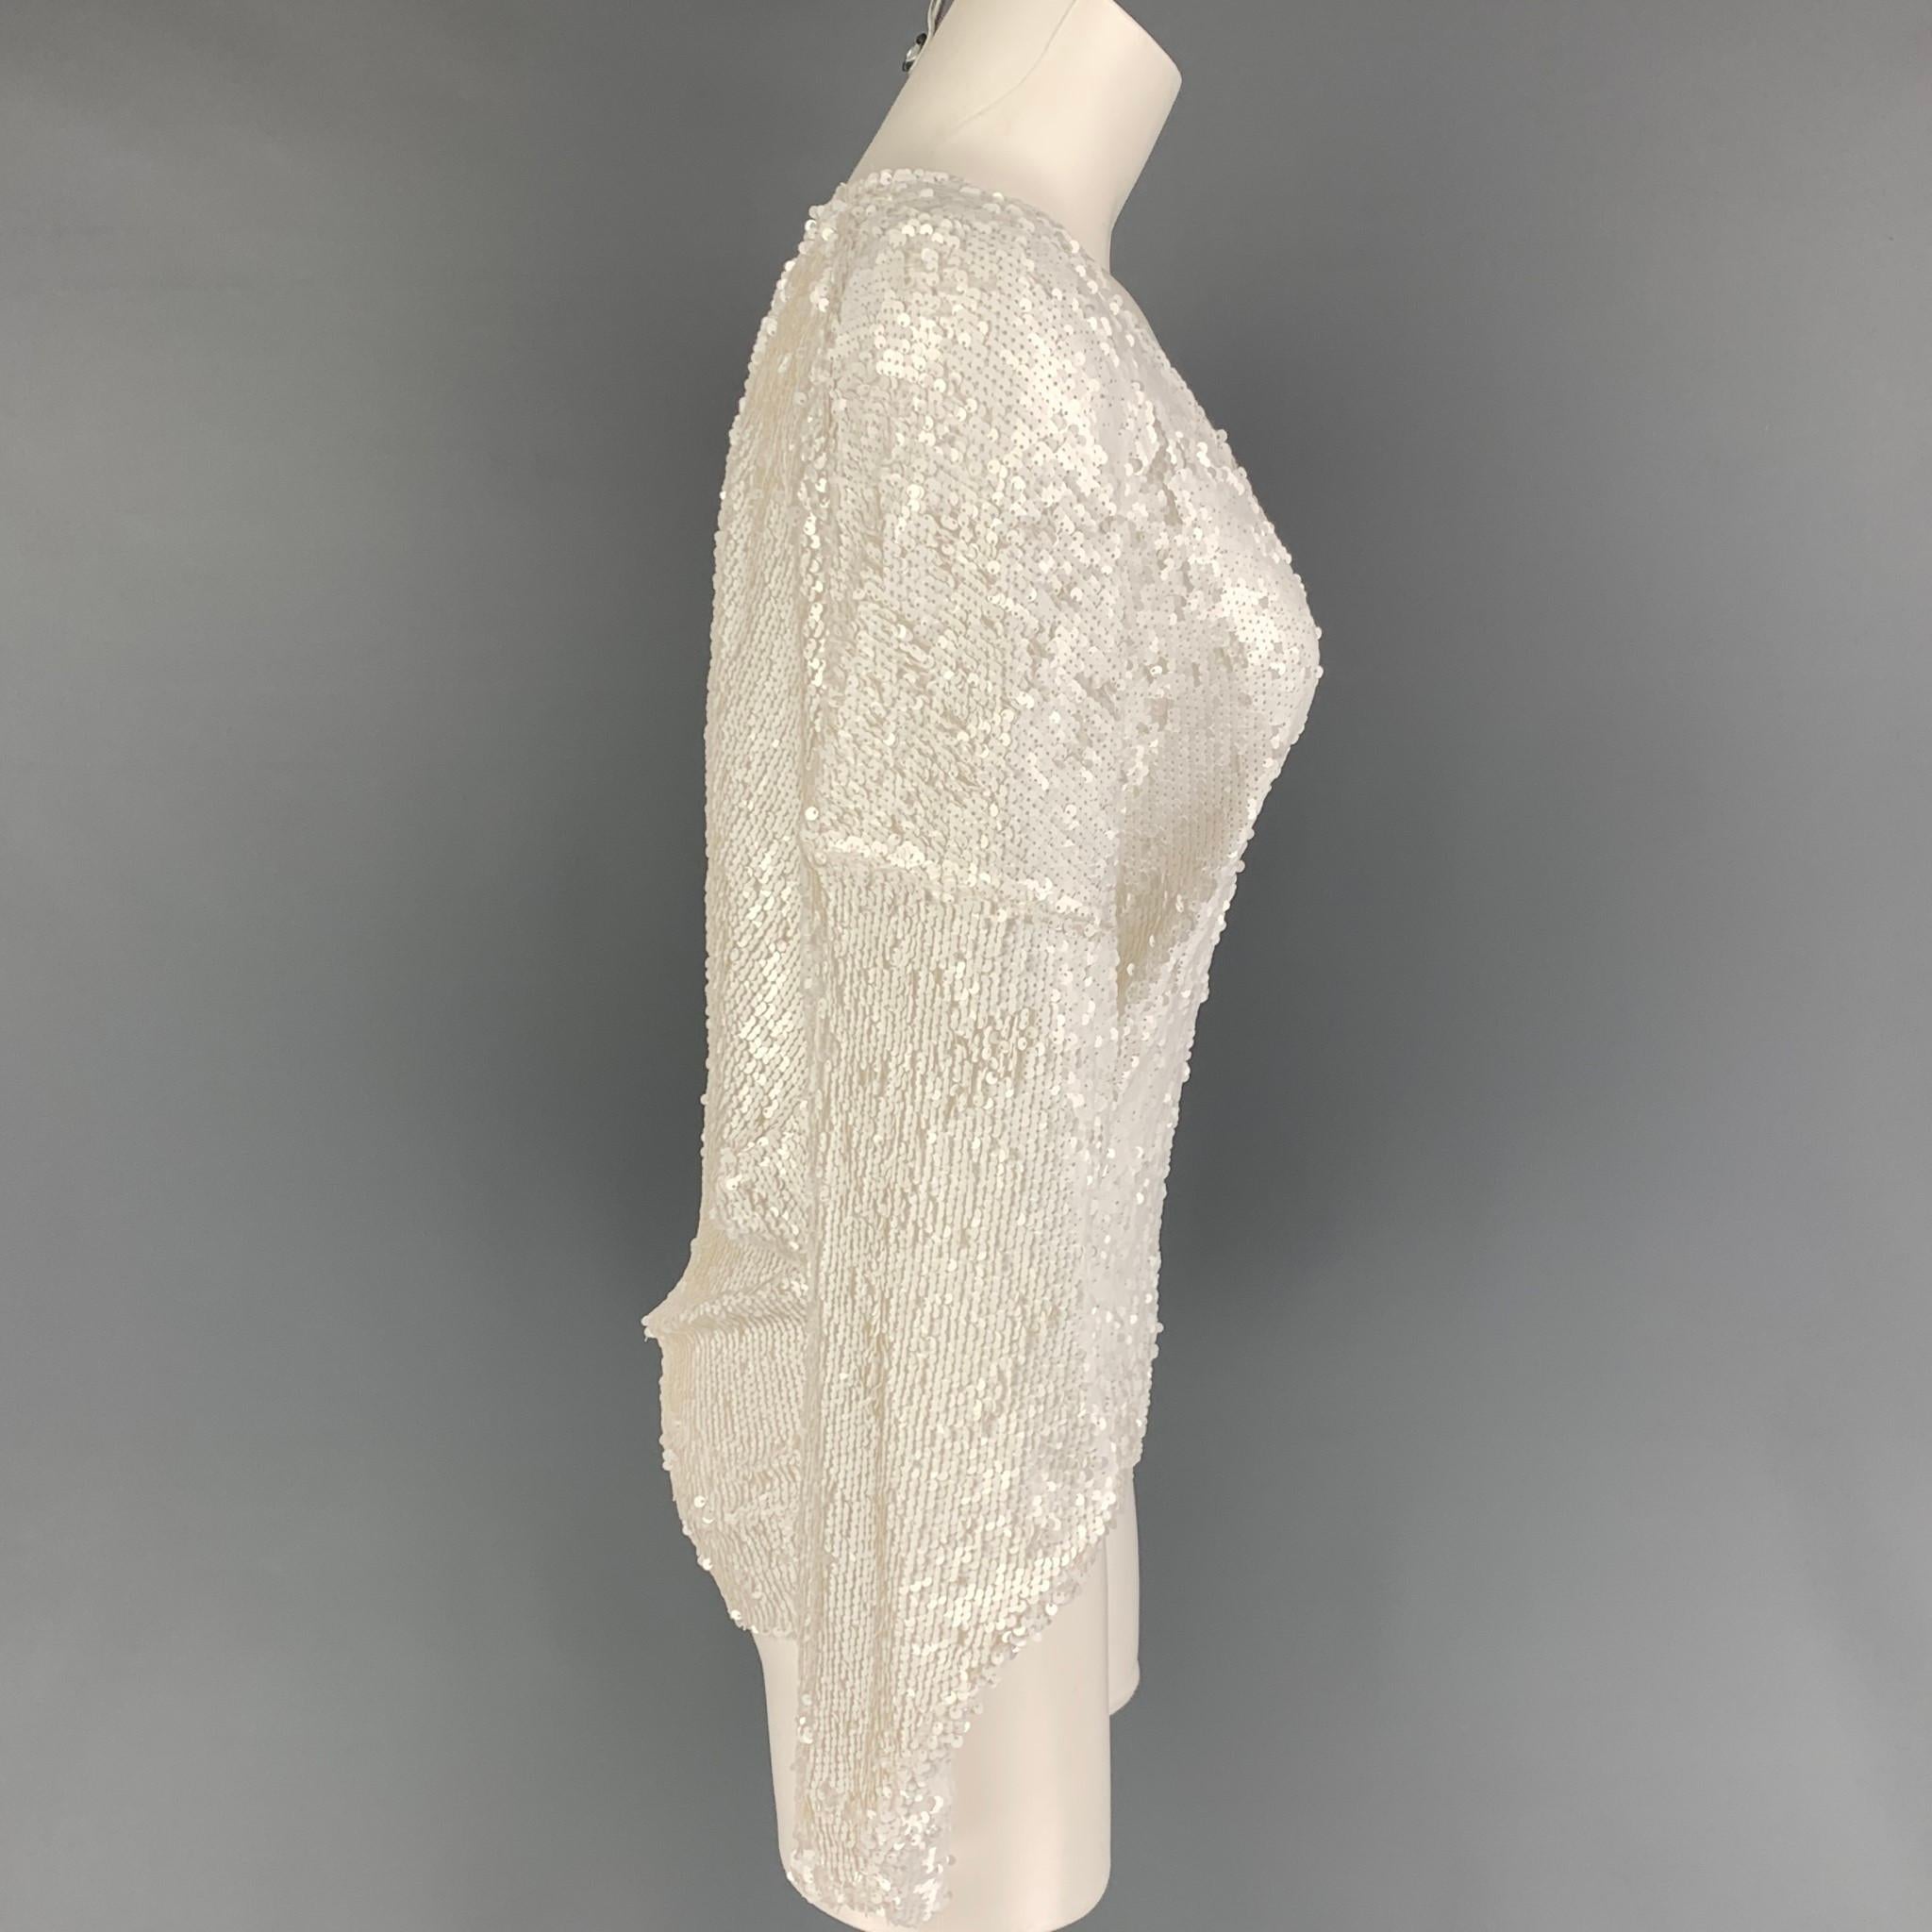 IRO dress top comes in a white sequin nylon featuring batwing sleeves and a v-neck. 

Very Good Pre-Owned Condition.
Marked: 34

Measurements:

Shoulder: 27 in.
Bust: 44 in.
Sleeve: 18.5 in.
Length: 25 in. 